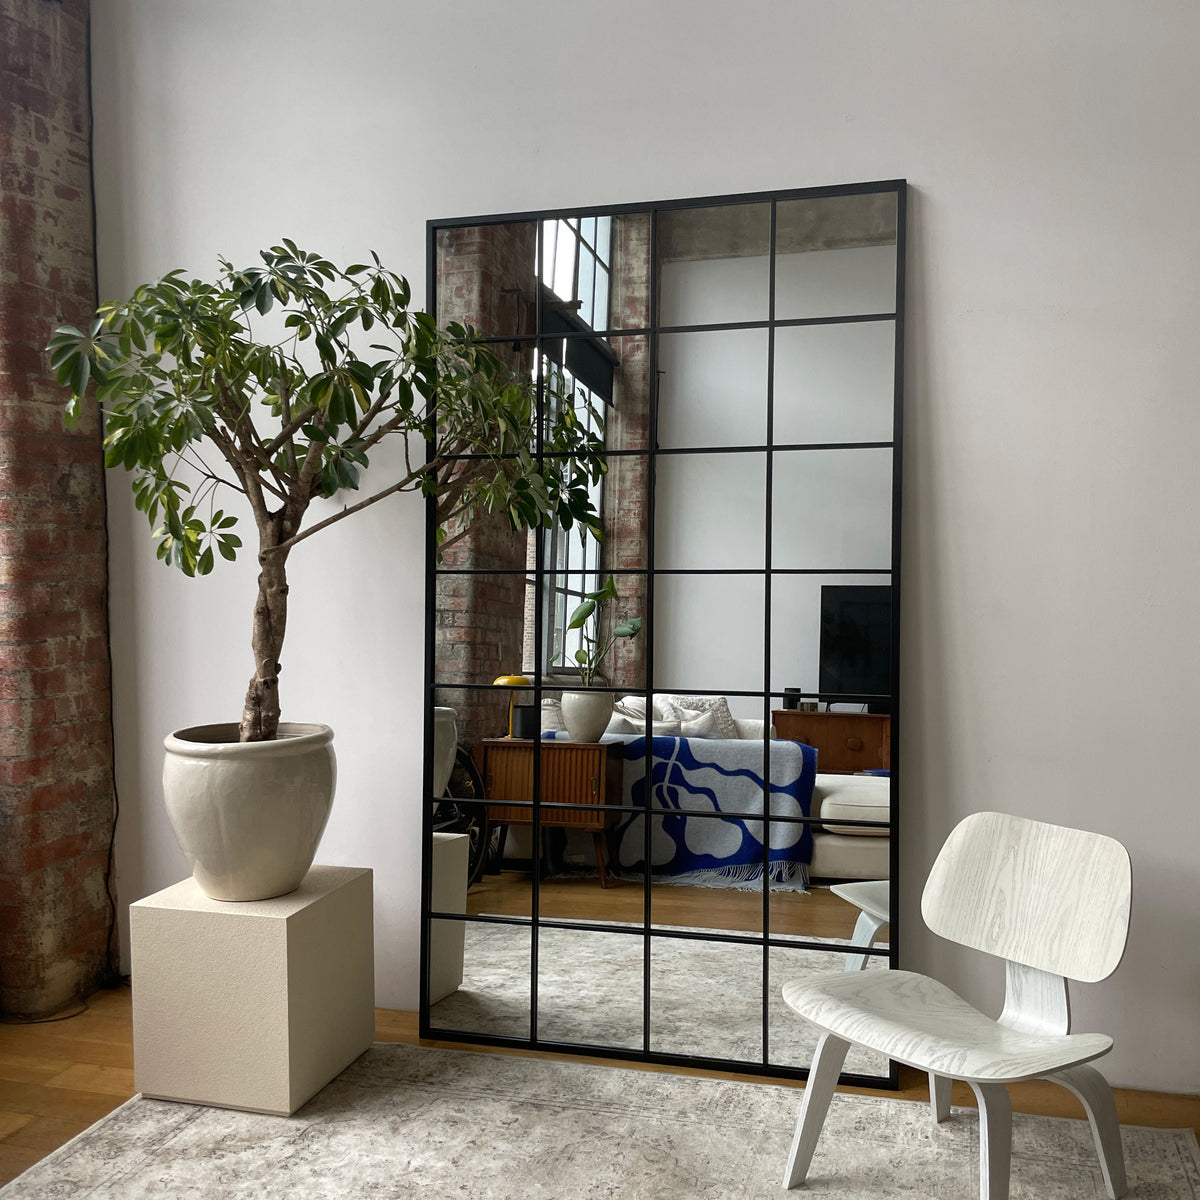 Full length extra large black industrial metal window mirror leaning against wall